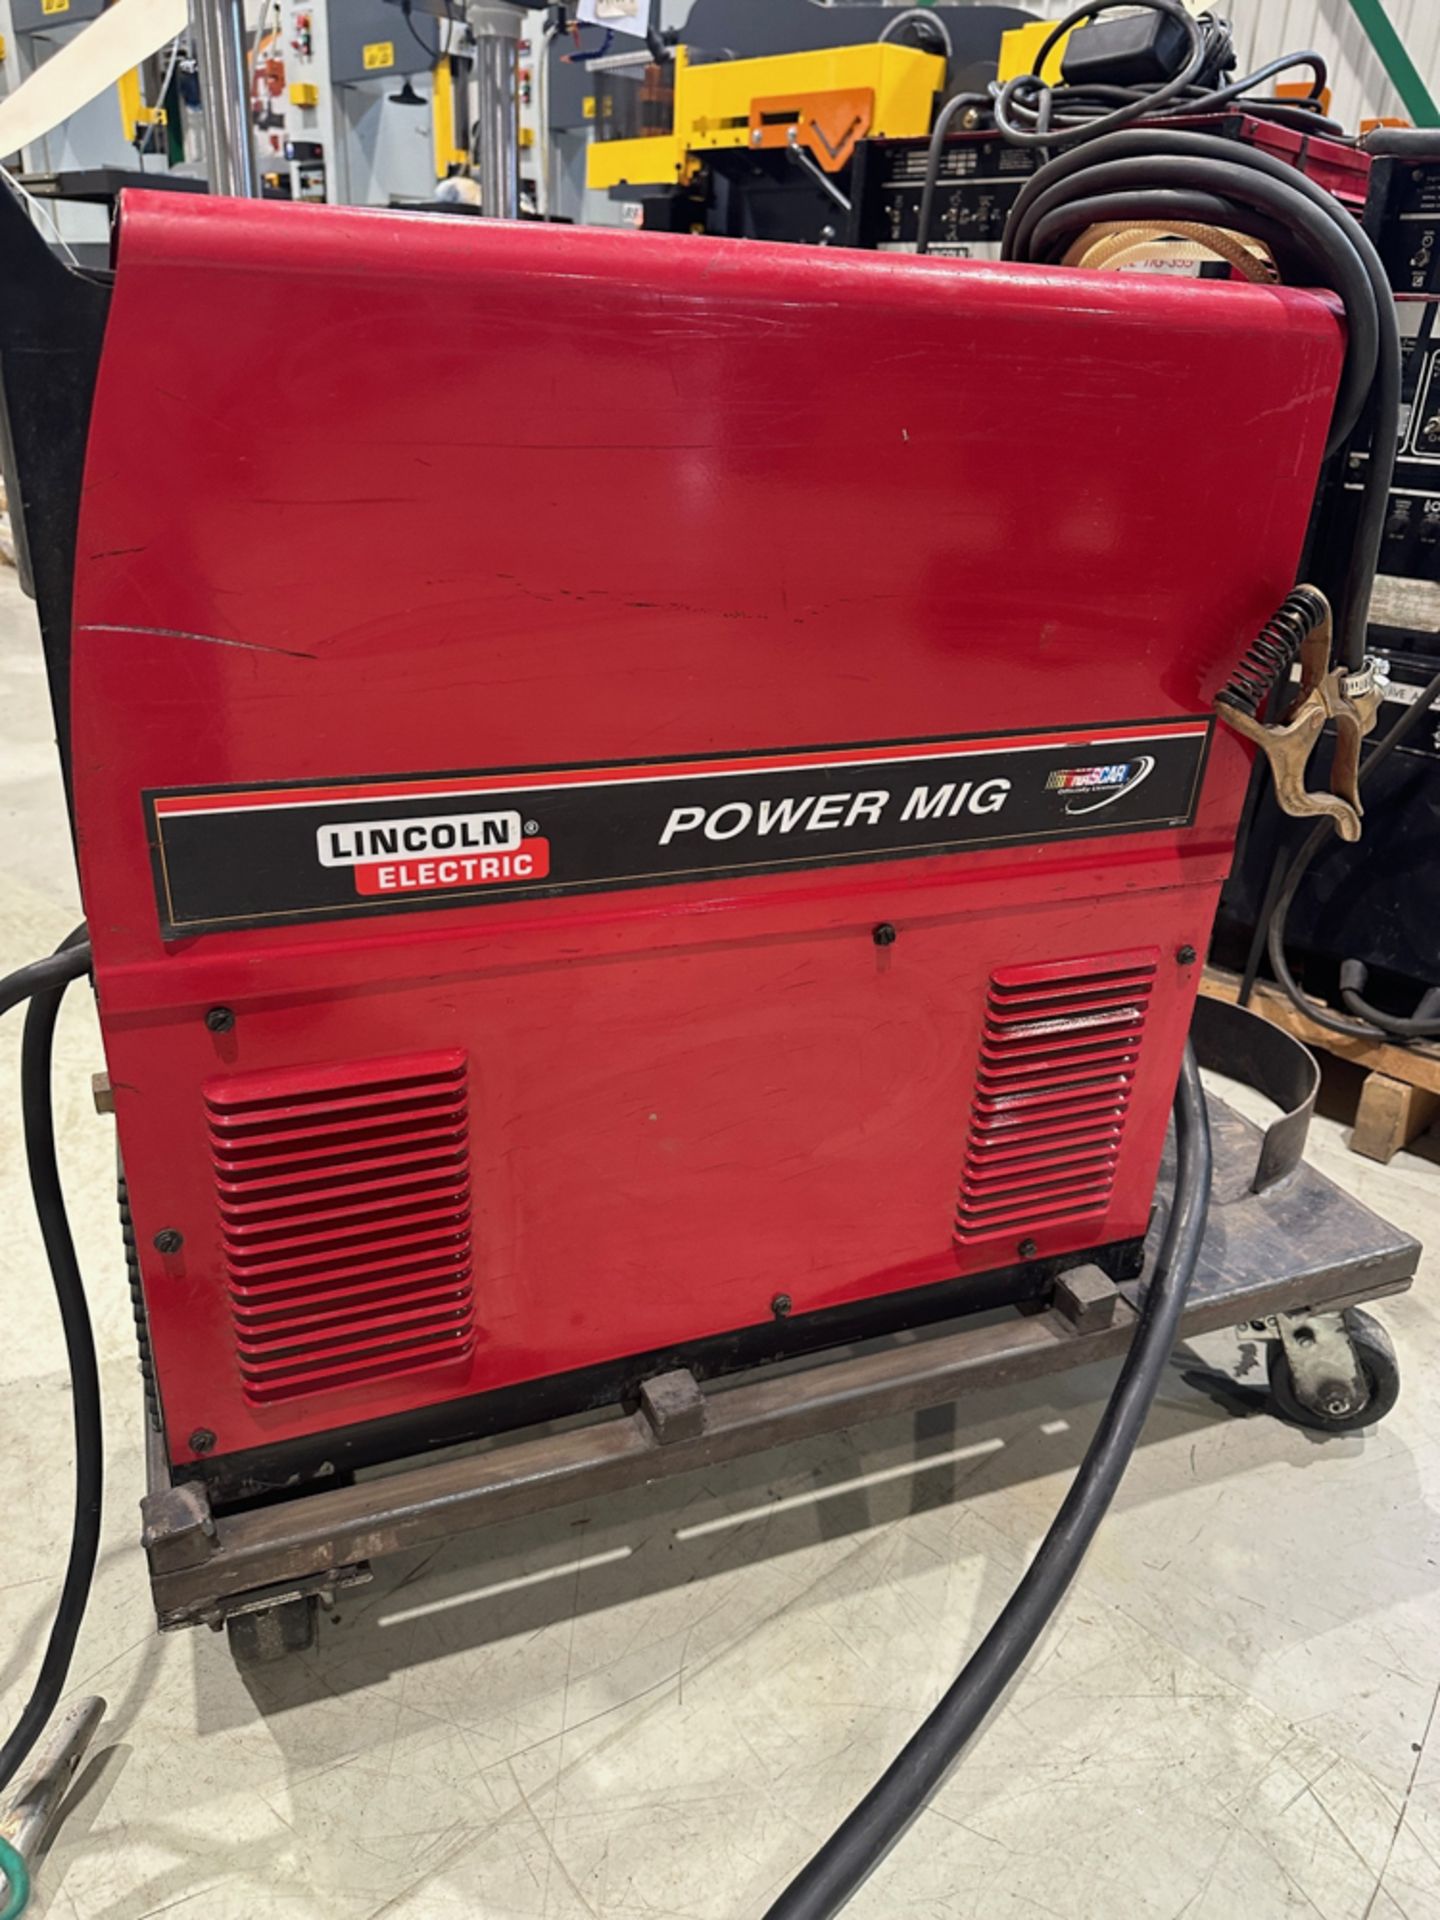 Lincoln Electric Welder, Model: Power MIG 350MP, SN: U1070306636, Cap: 350 Amps - Image 3 of 4